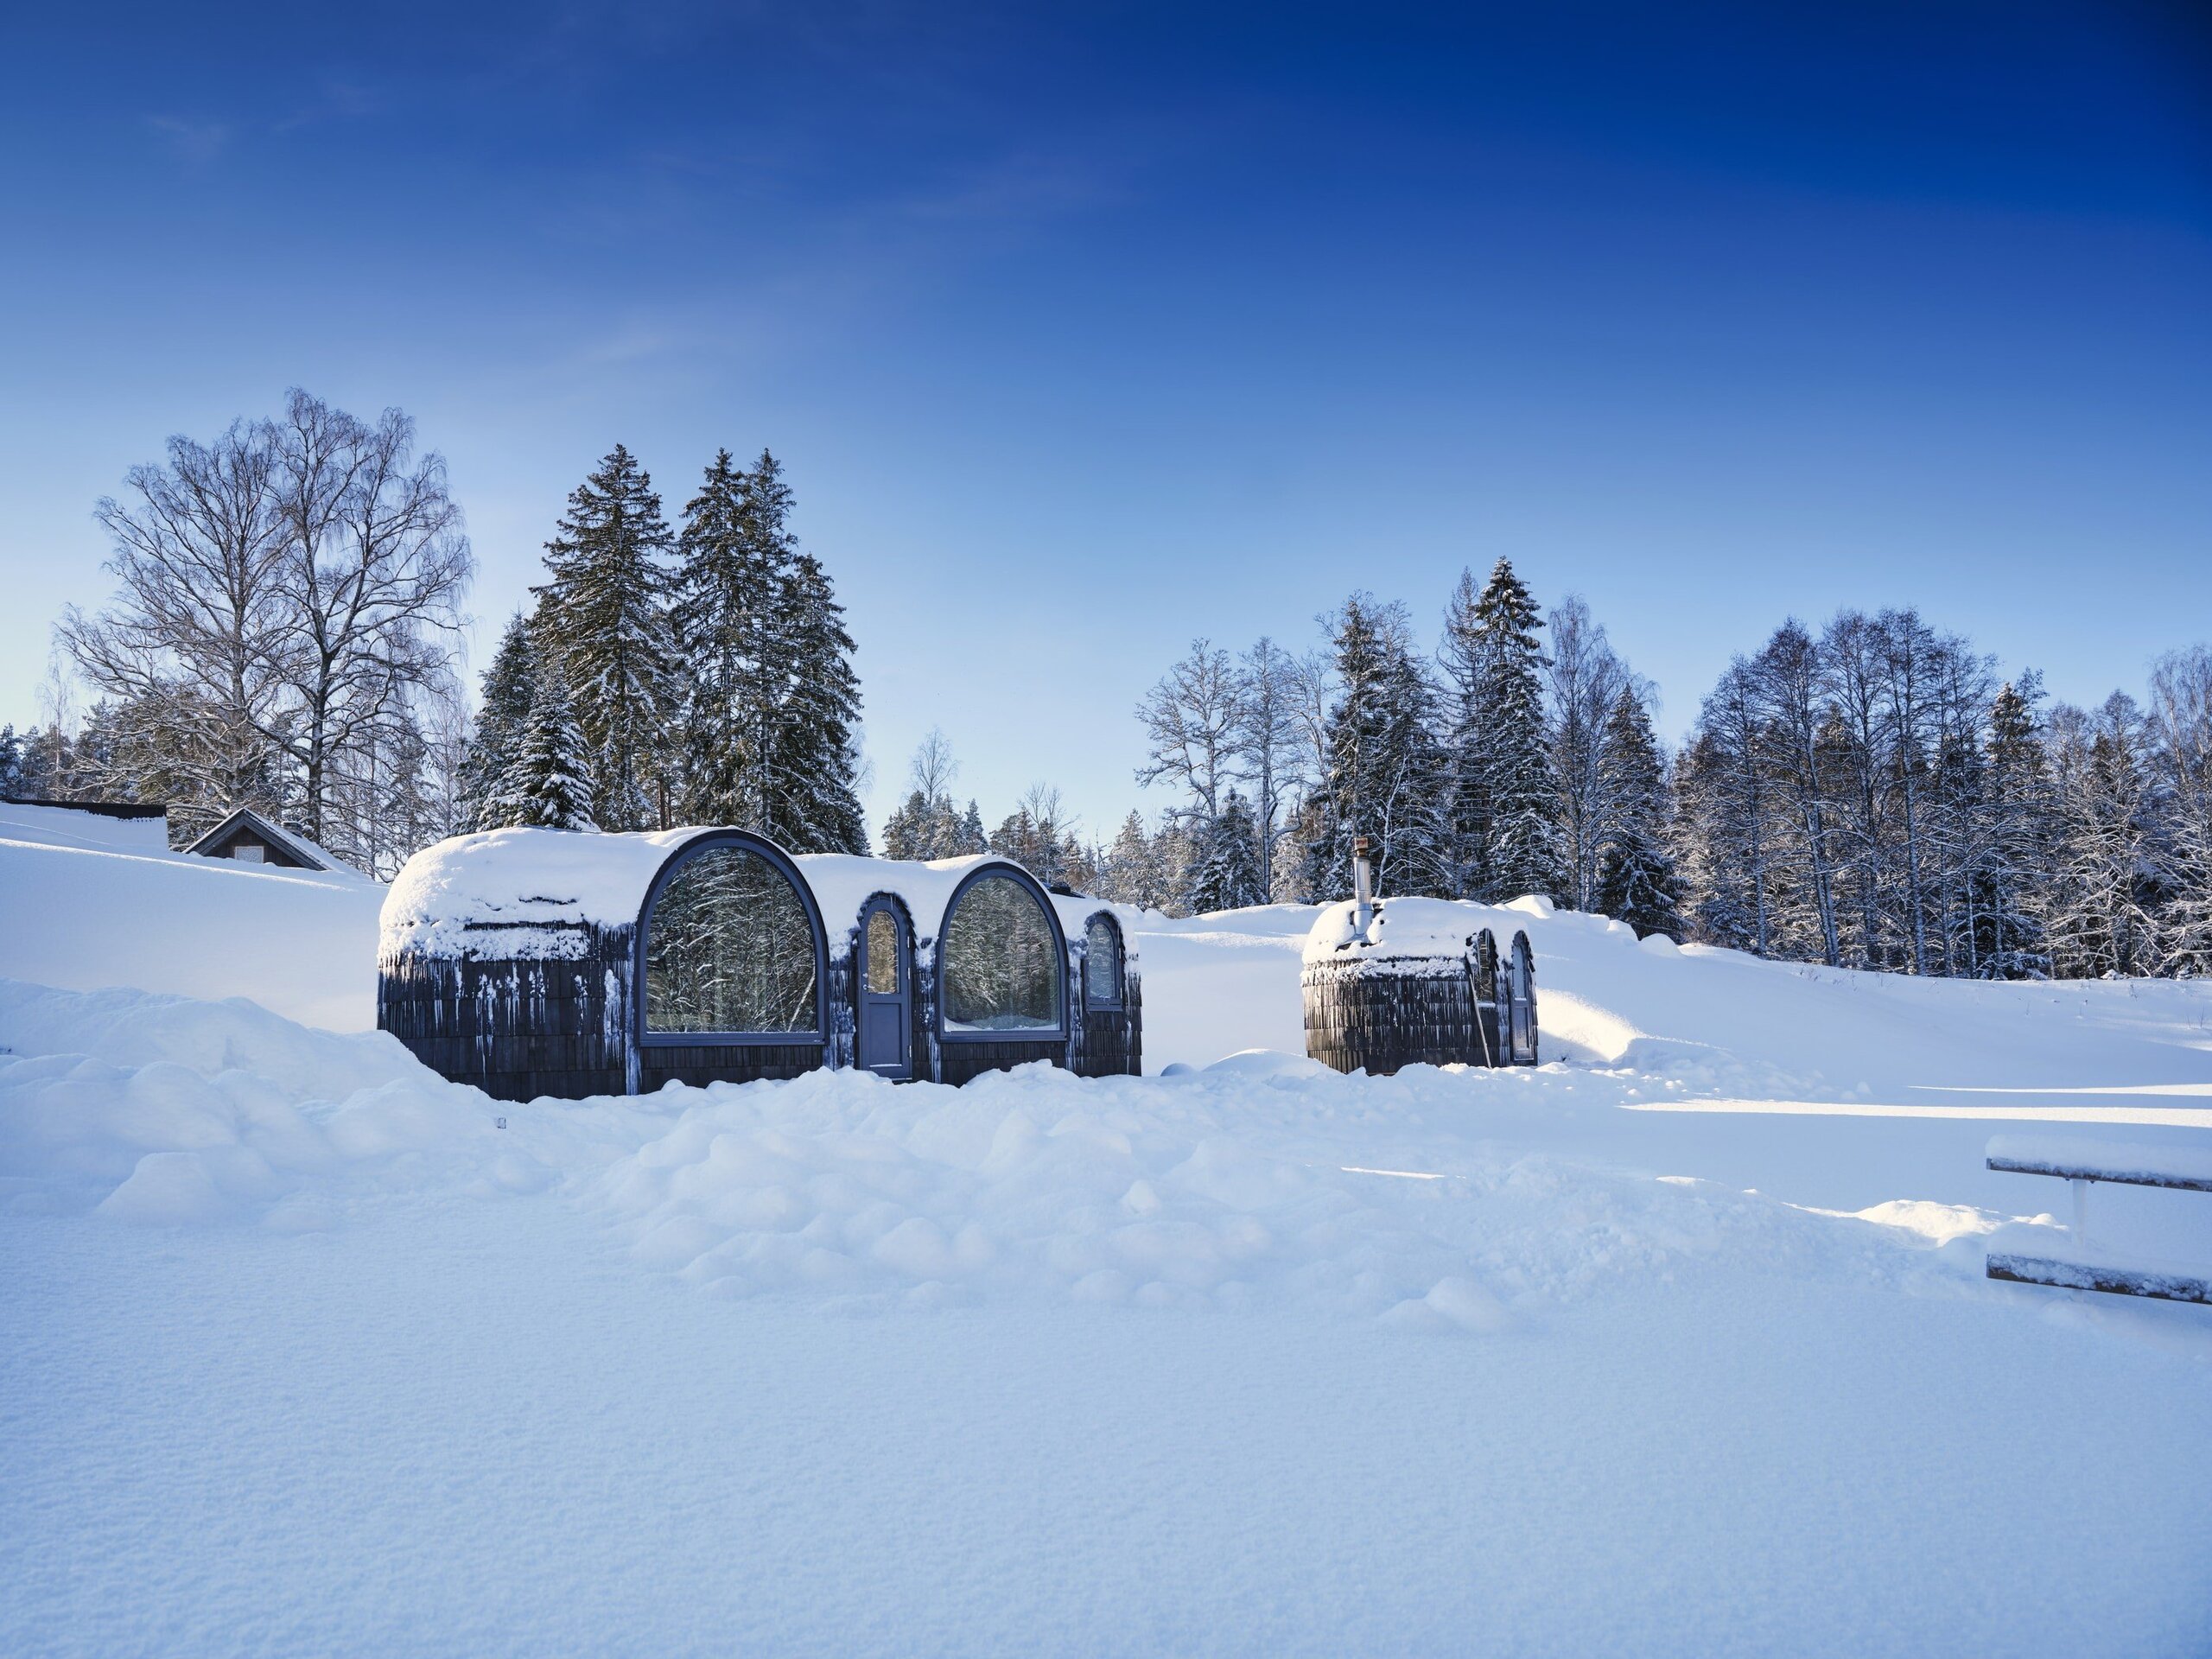 Cabin and Saunas under a blanket of snow